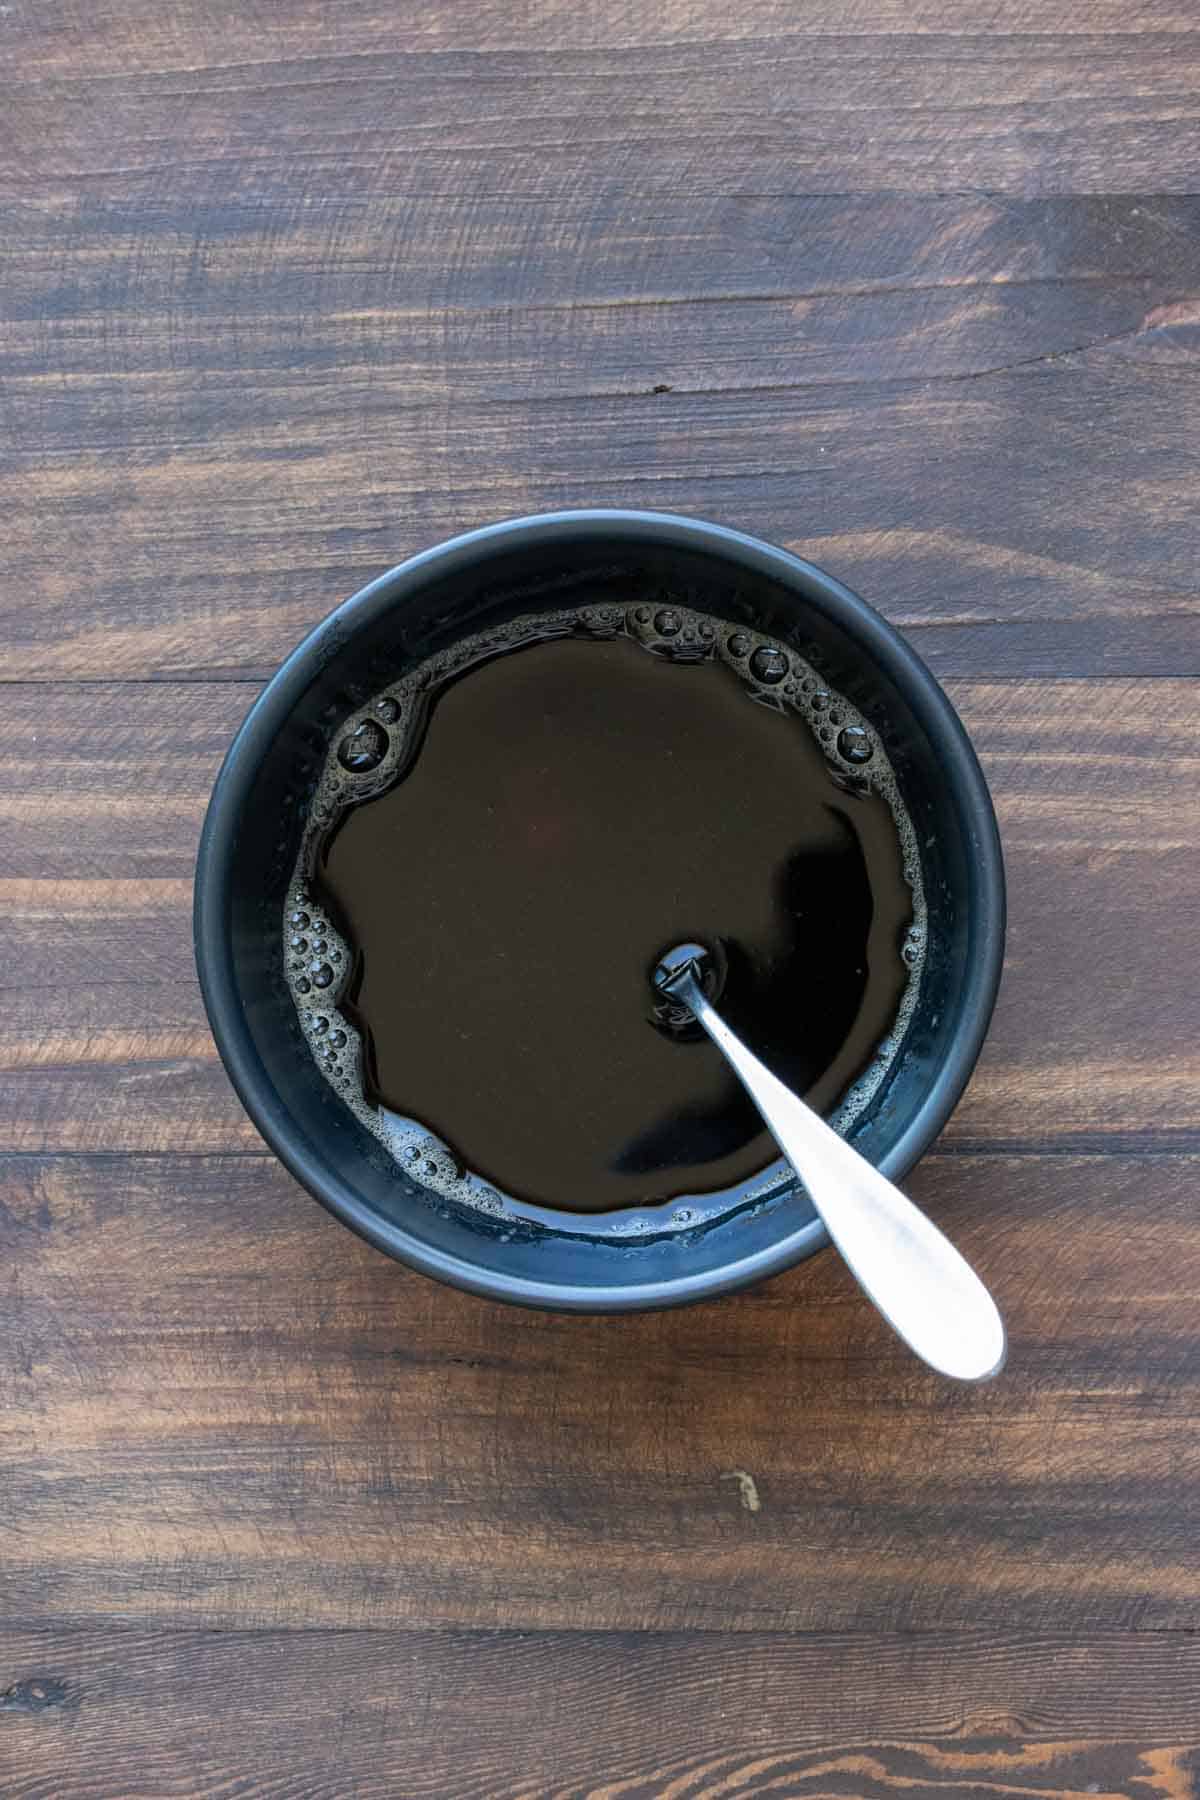 Spoon in a black bowl filled with coffee